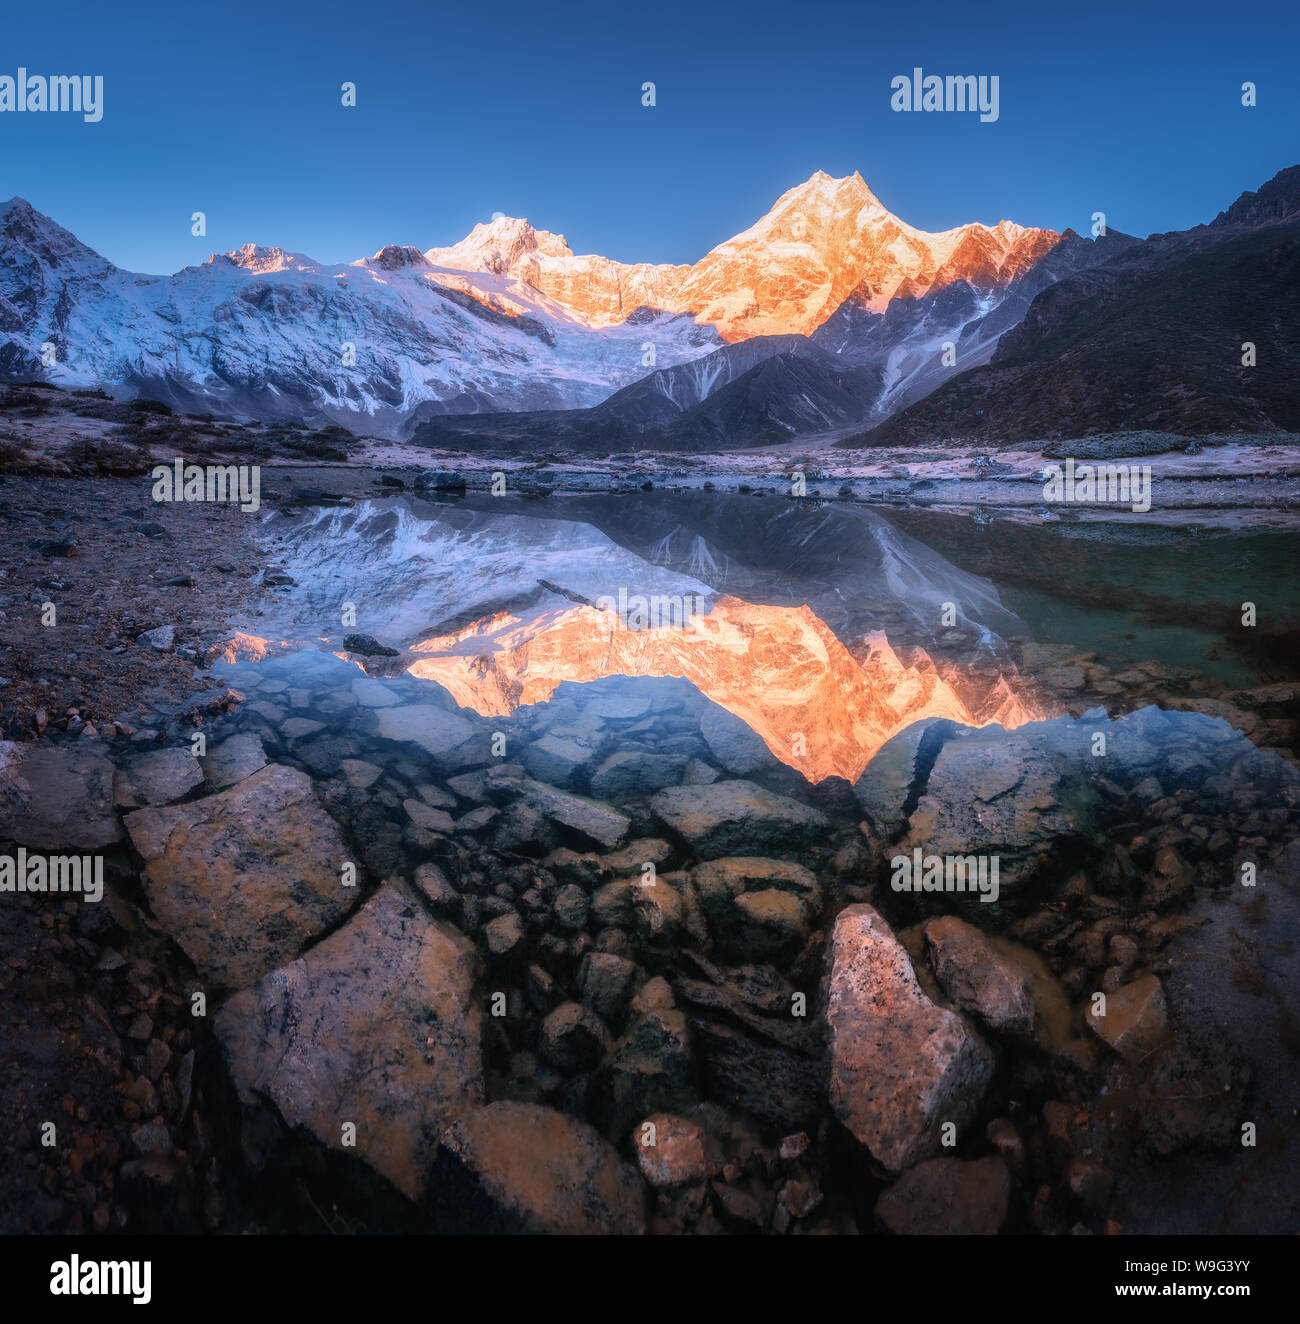 Snowy mountain with illuminated peaks is reflected in lake Stock Photo